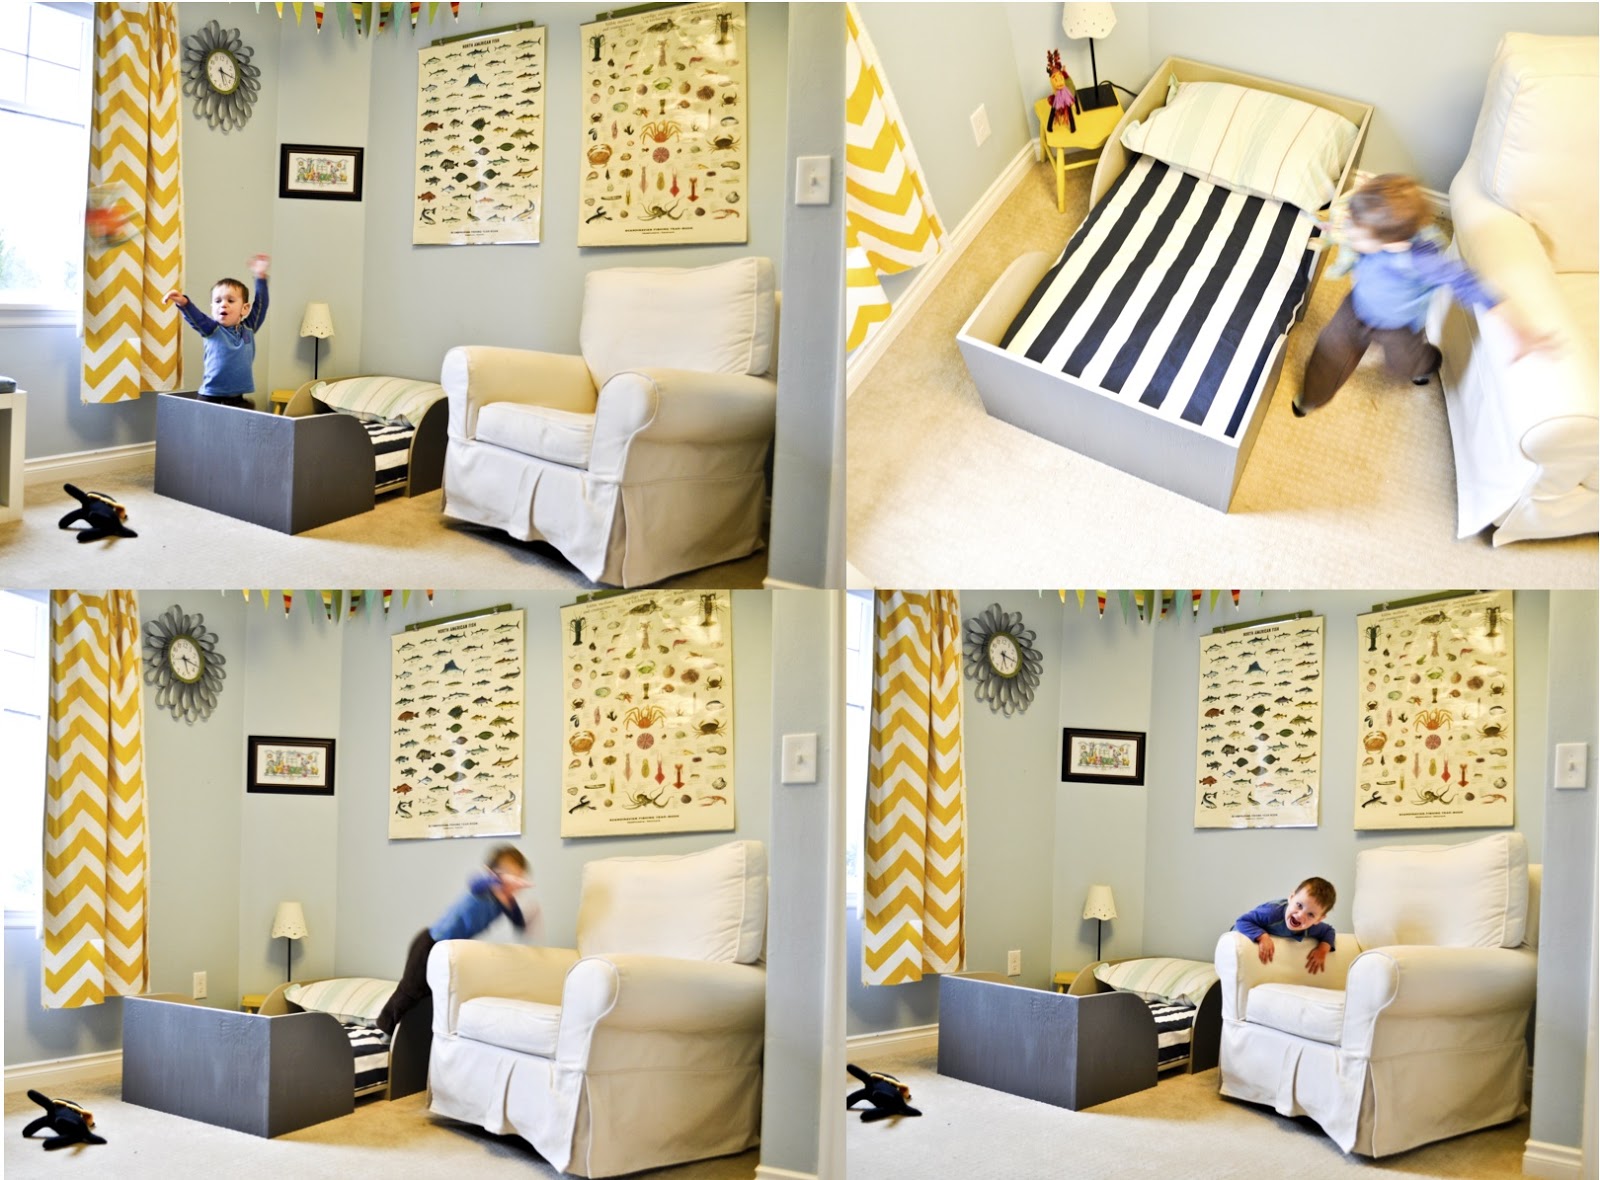 Chris and Sonja - The Sweet Seattle Life: DIY Toddler Bed